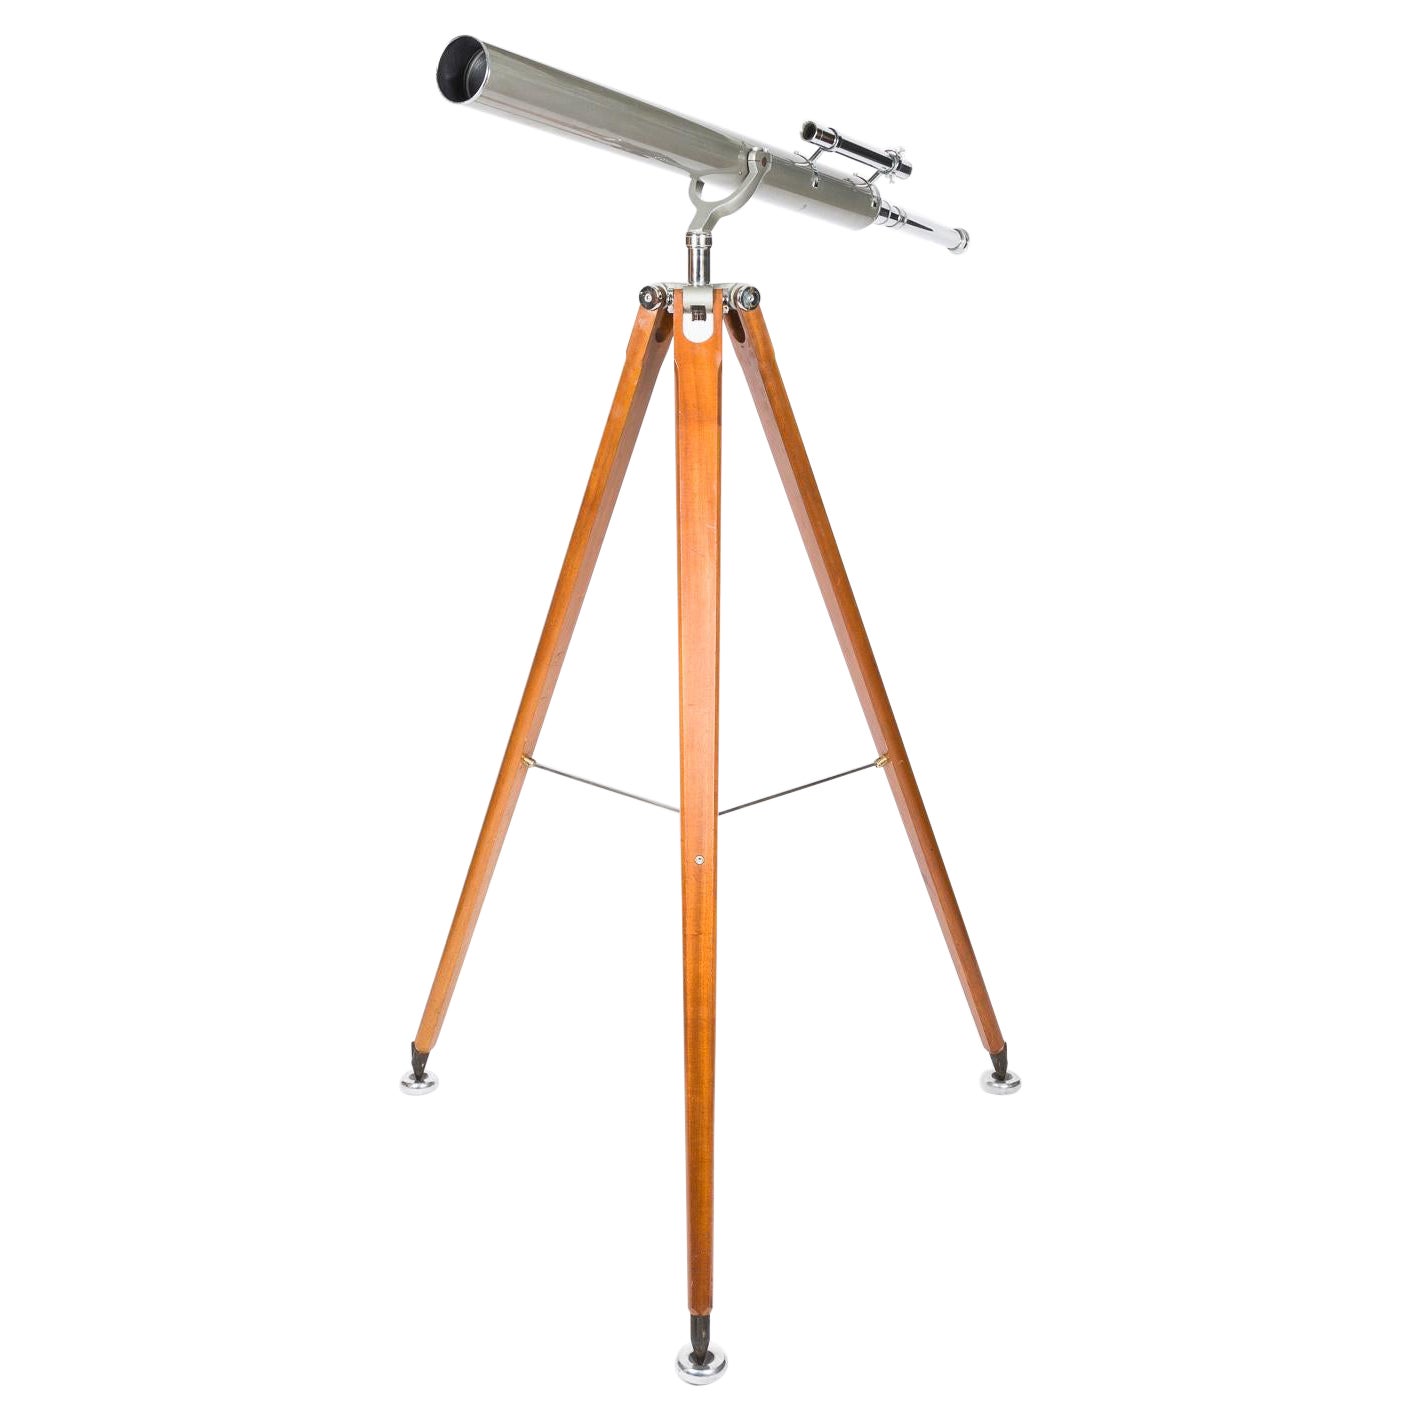 Astro tripod mounted telescope by Dollond of London For Sale